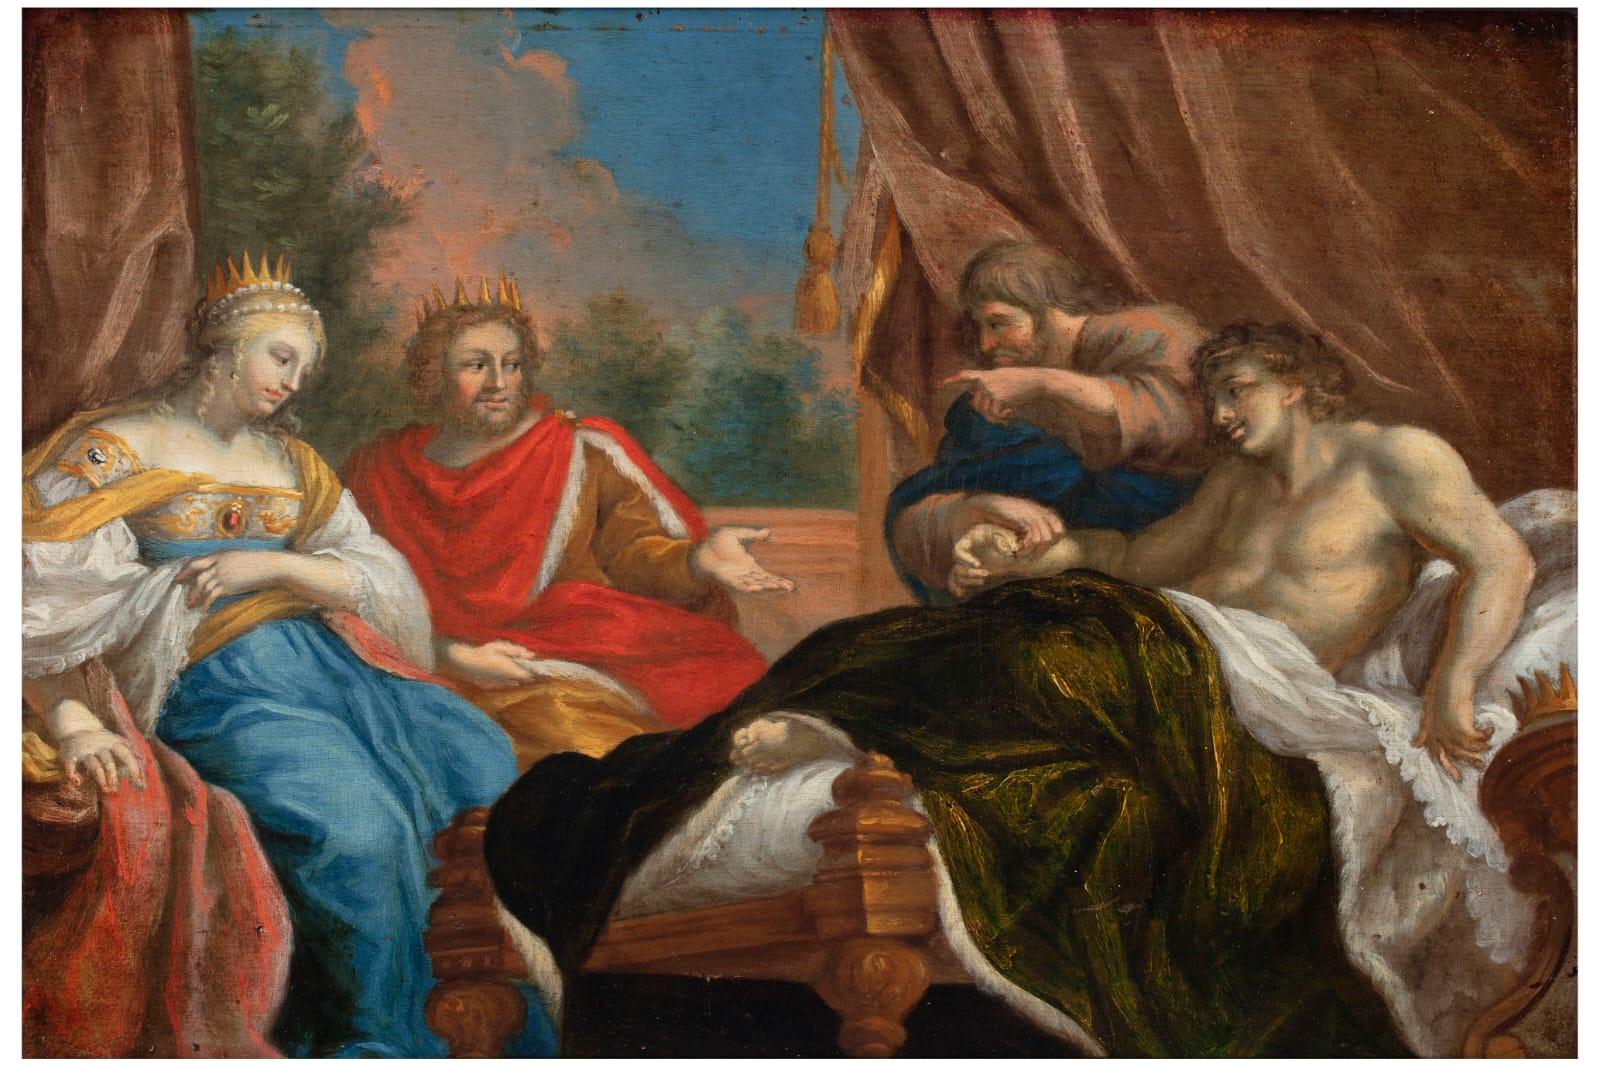 Antiochus and Stratonice, circle of Girolamo Brusaferro (c. 1684 - Venice, c. 1760), oil on panel, measures 21x31 cm, with 20th-century frame 31x41 cm, 3 cm thick.
On the back of the painting is a fragment of an old label written in French that